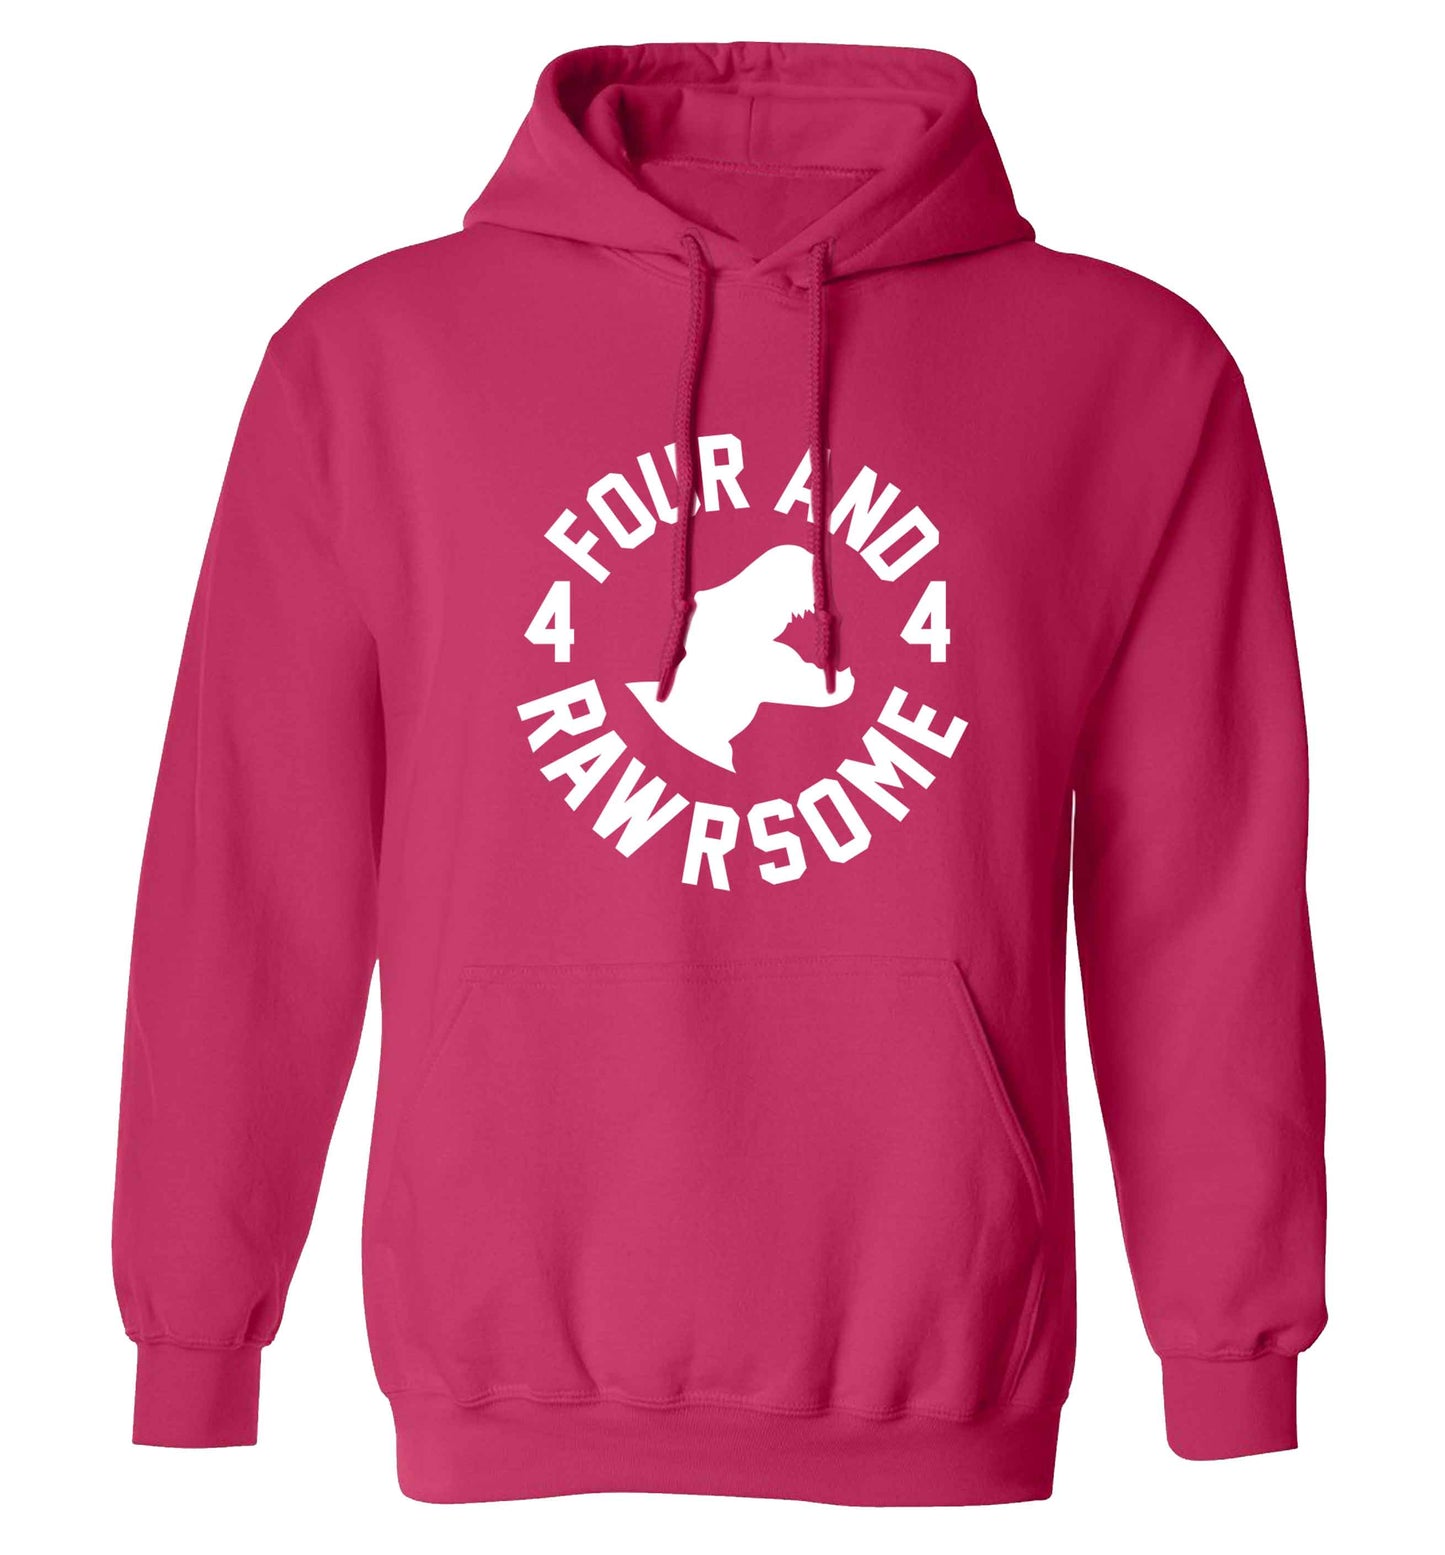 Four and rawrsome adults unisex pink hoodie 2XL